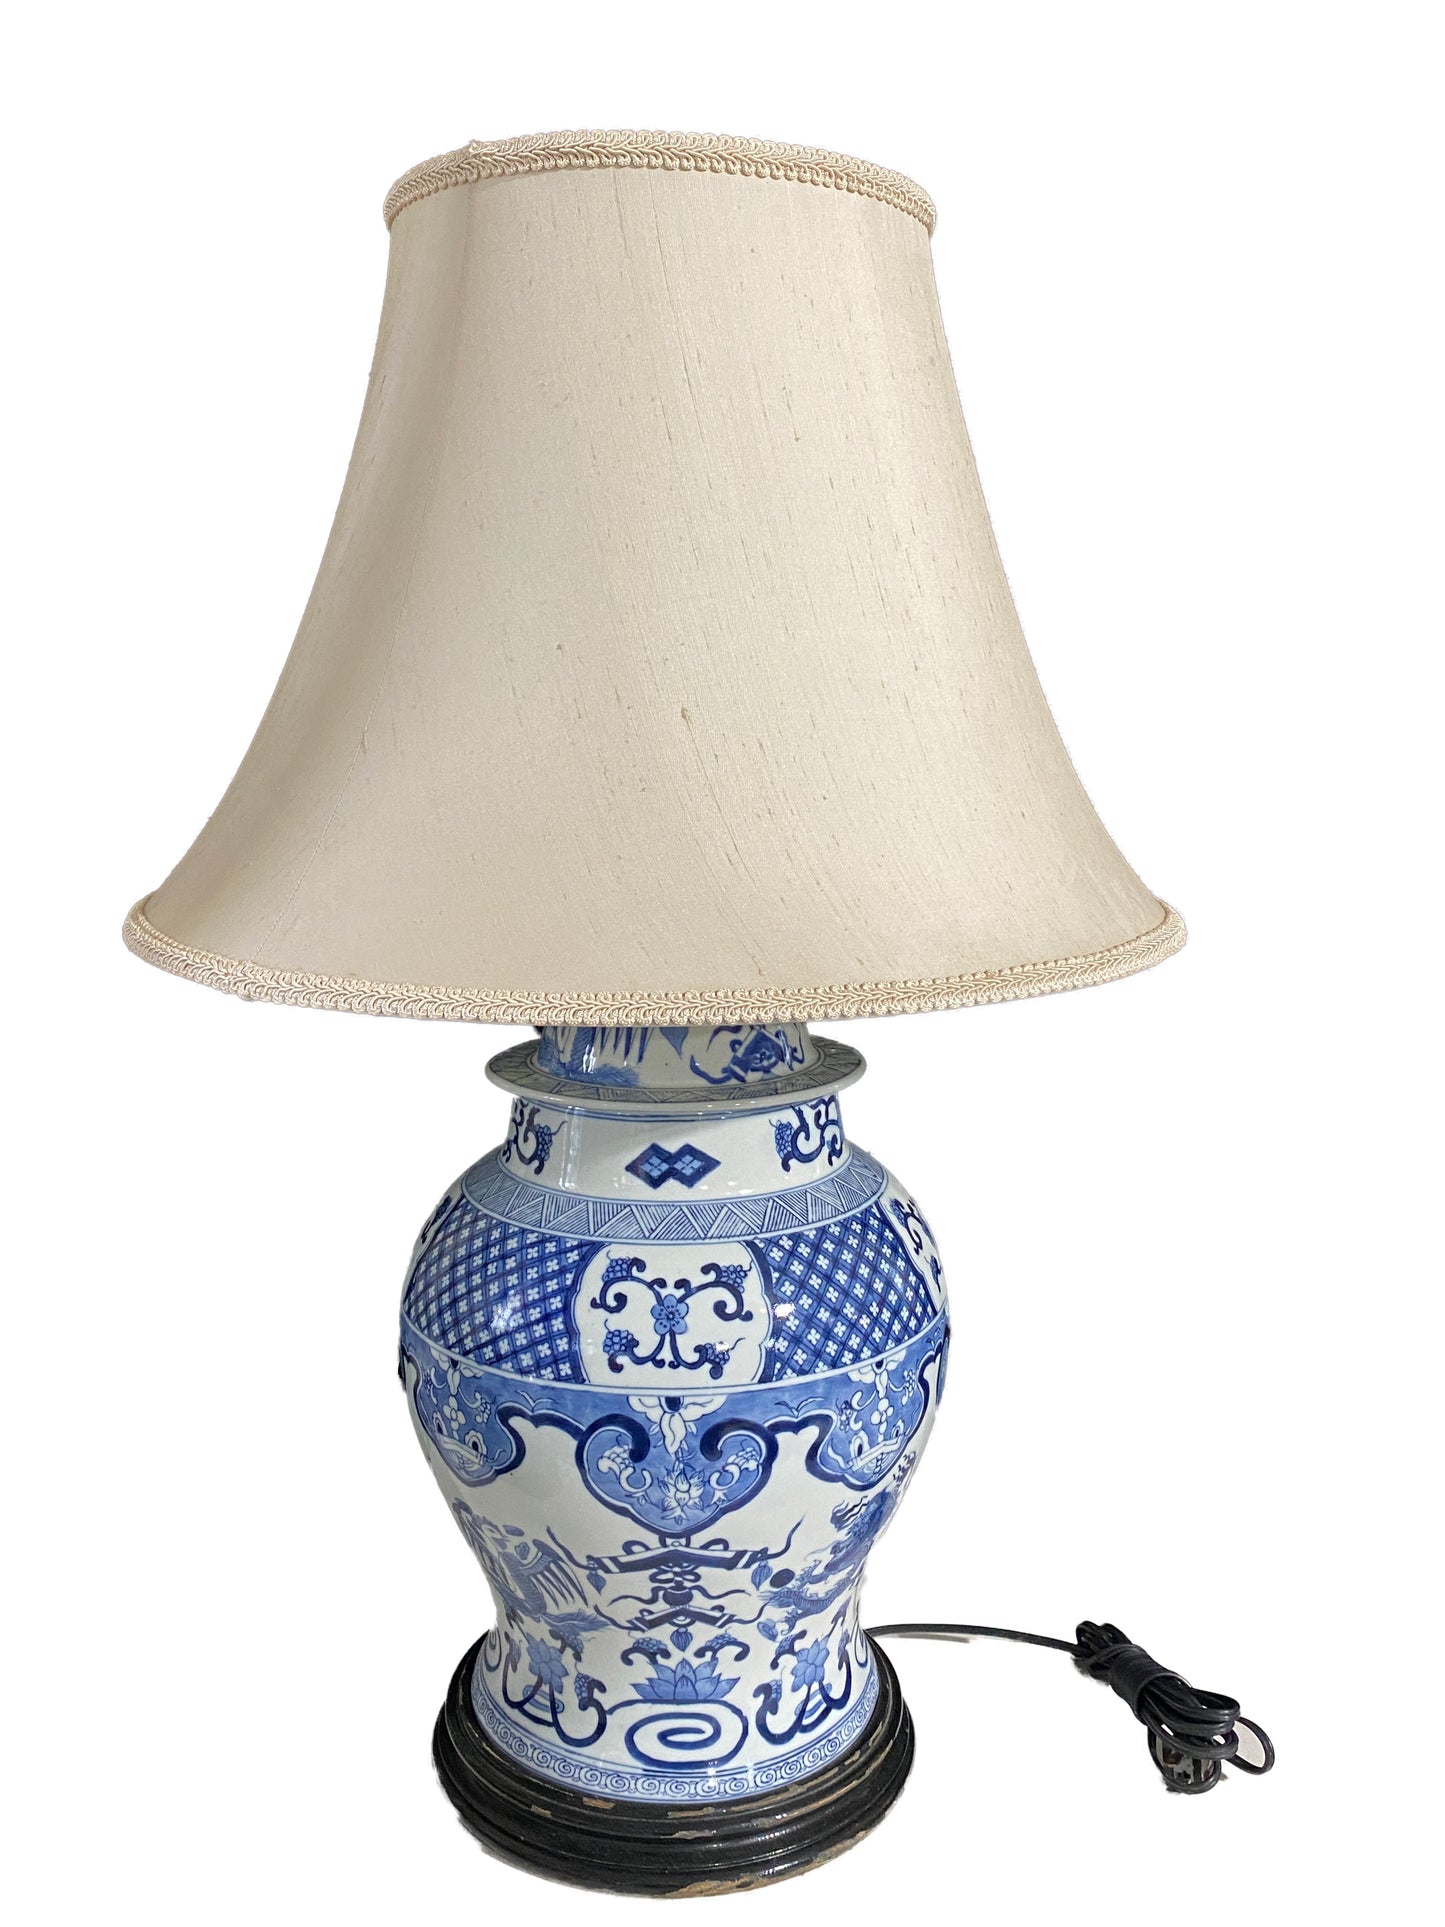 #4122 Chinoiserie Blue and White Ceramic Ginger Jar / Table Lamp